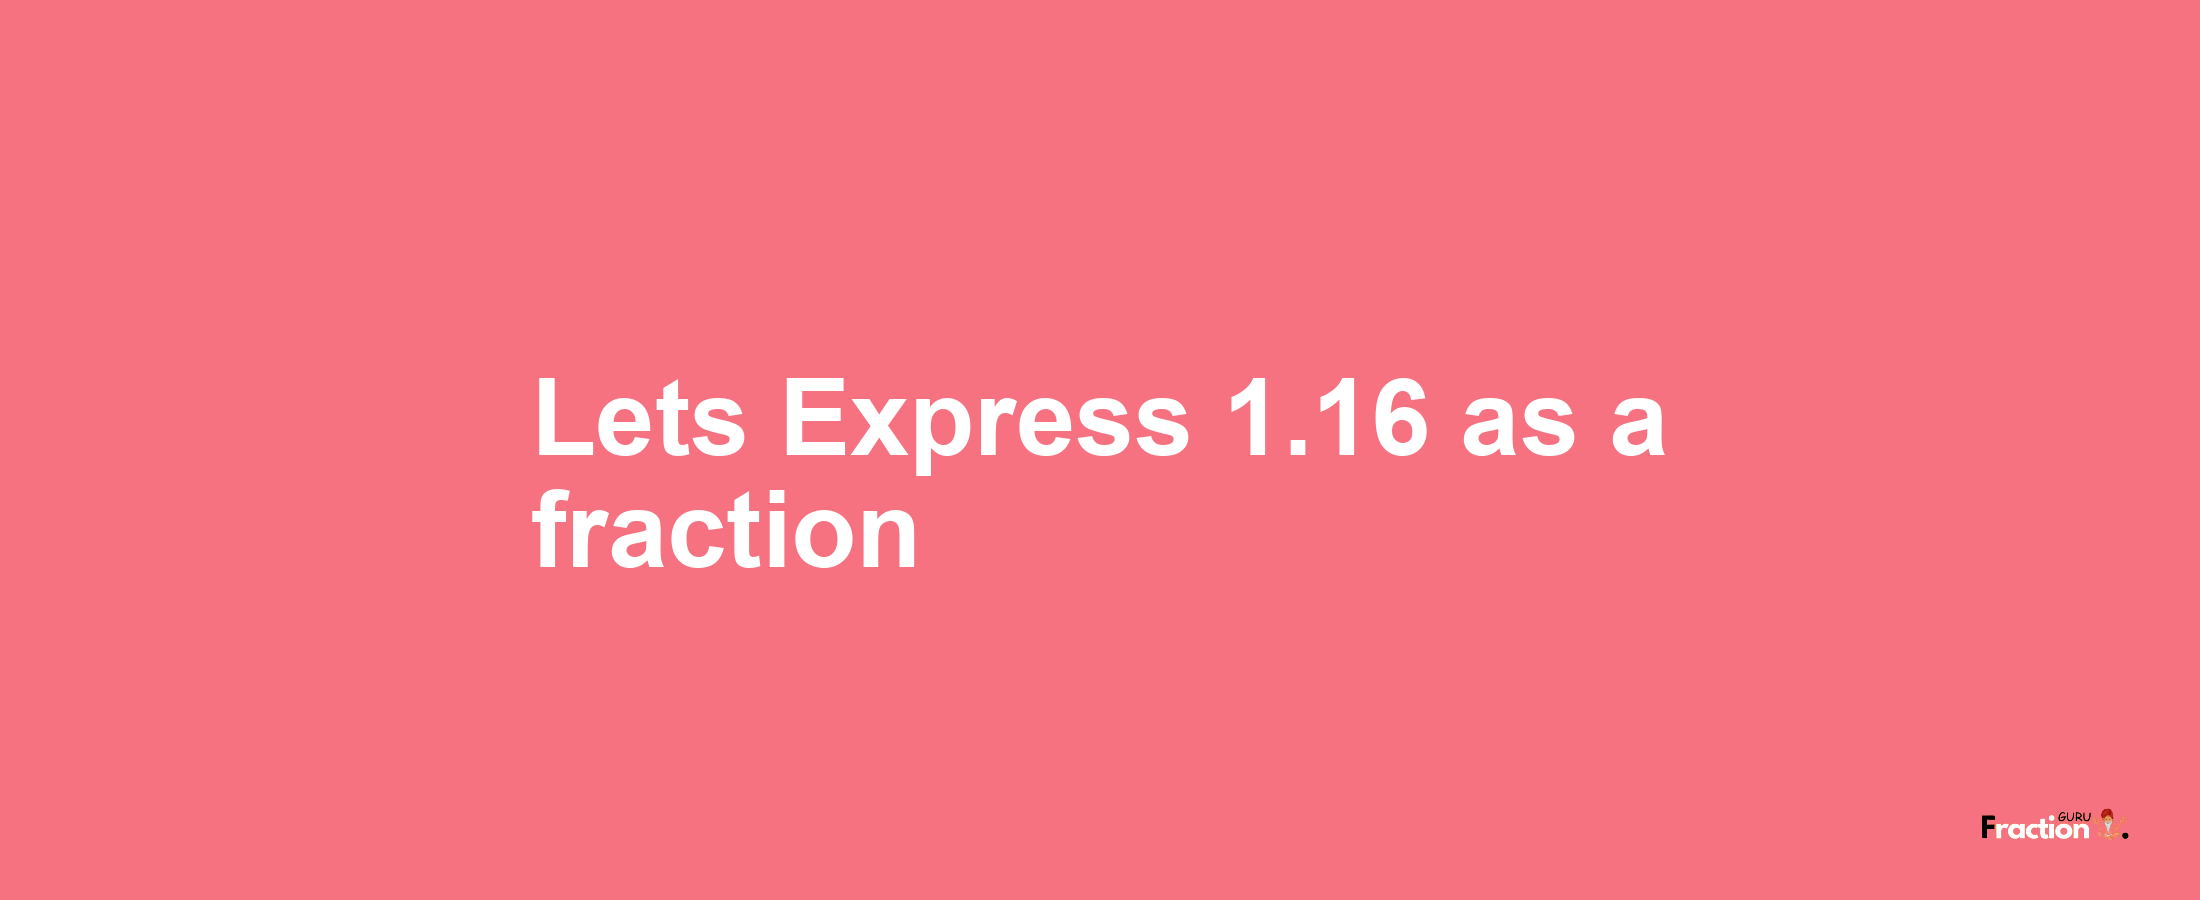 Lets Express 1.16 as afraction